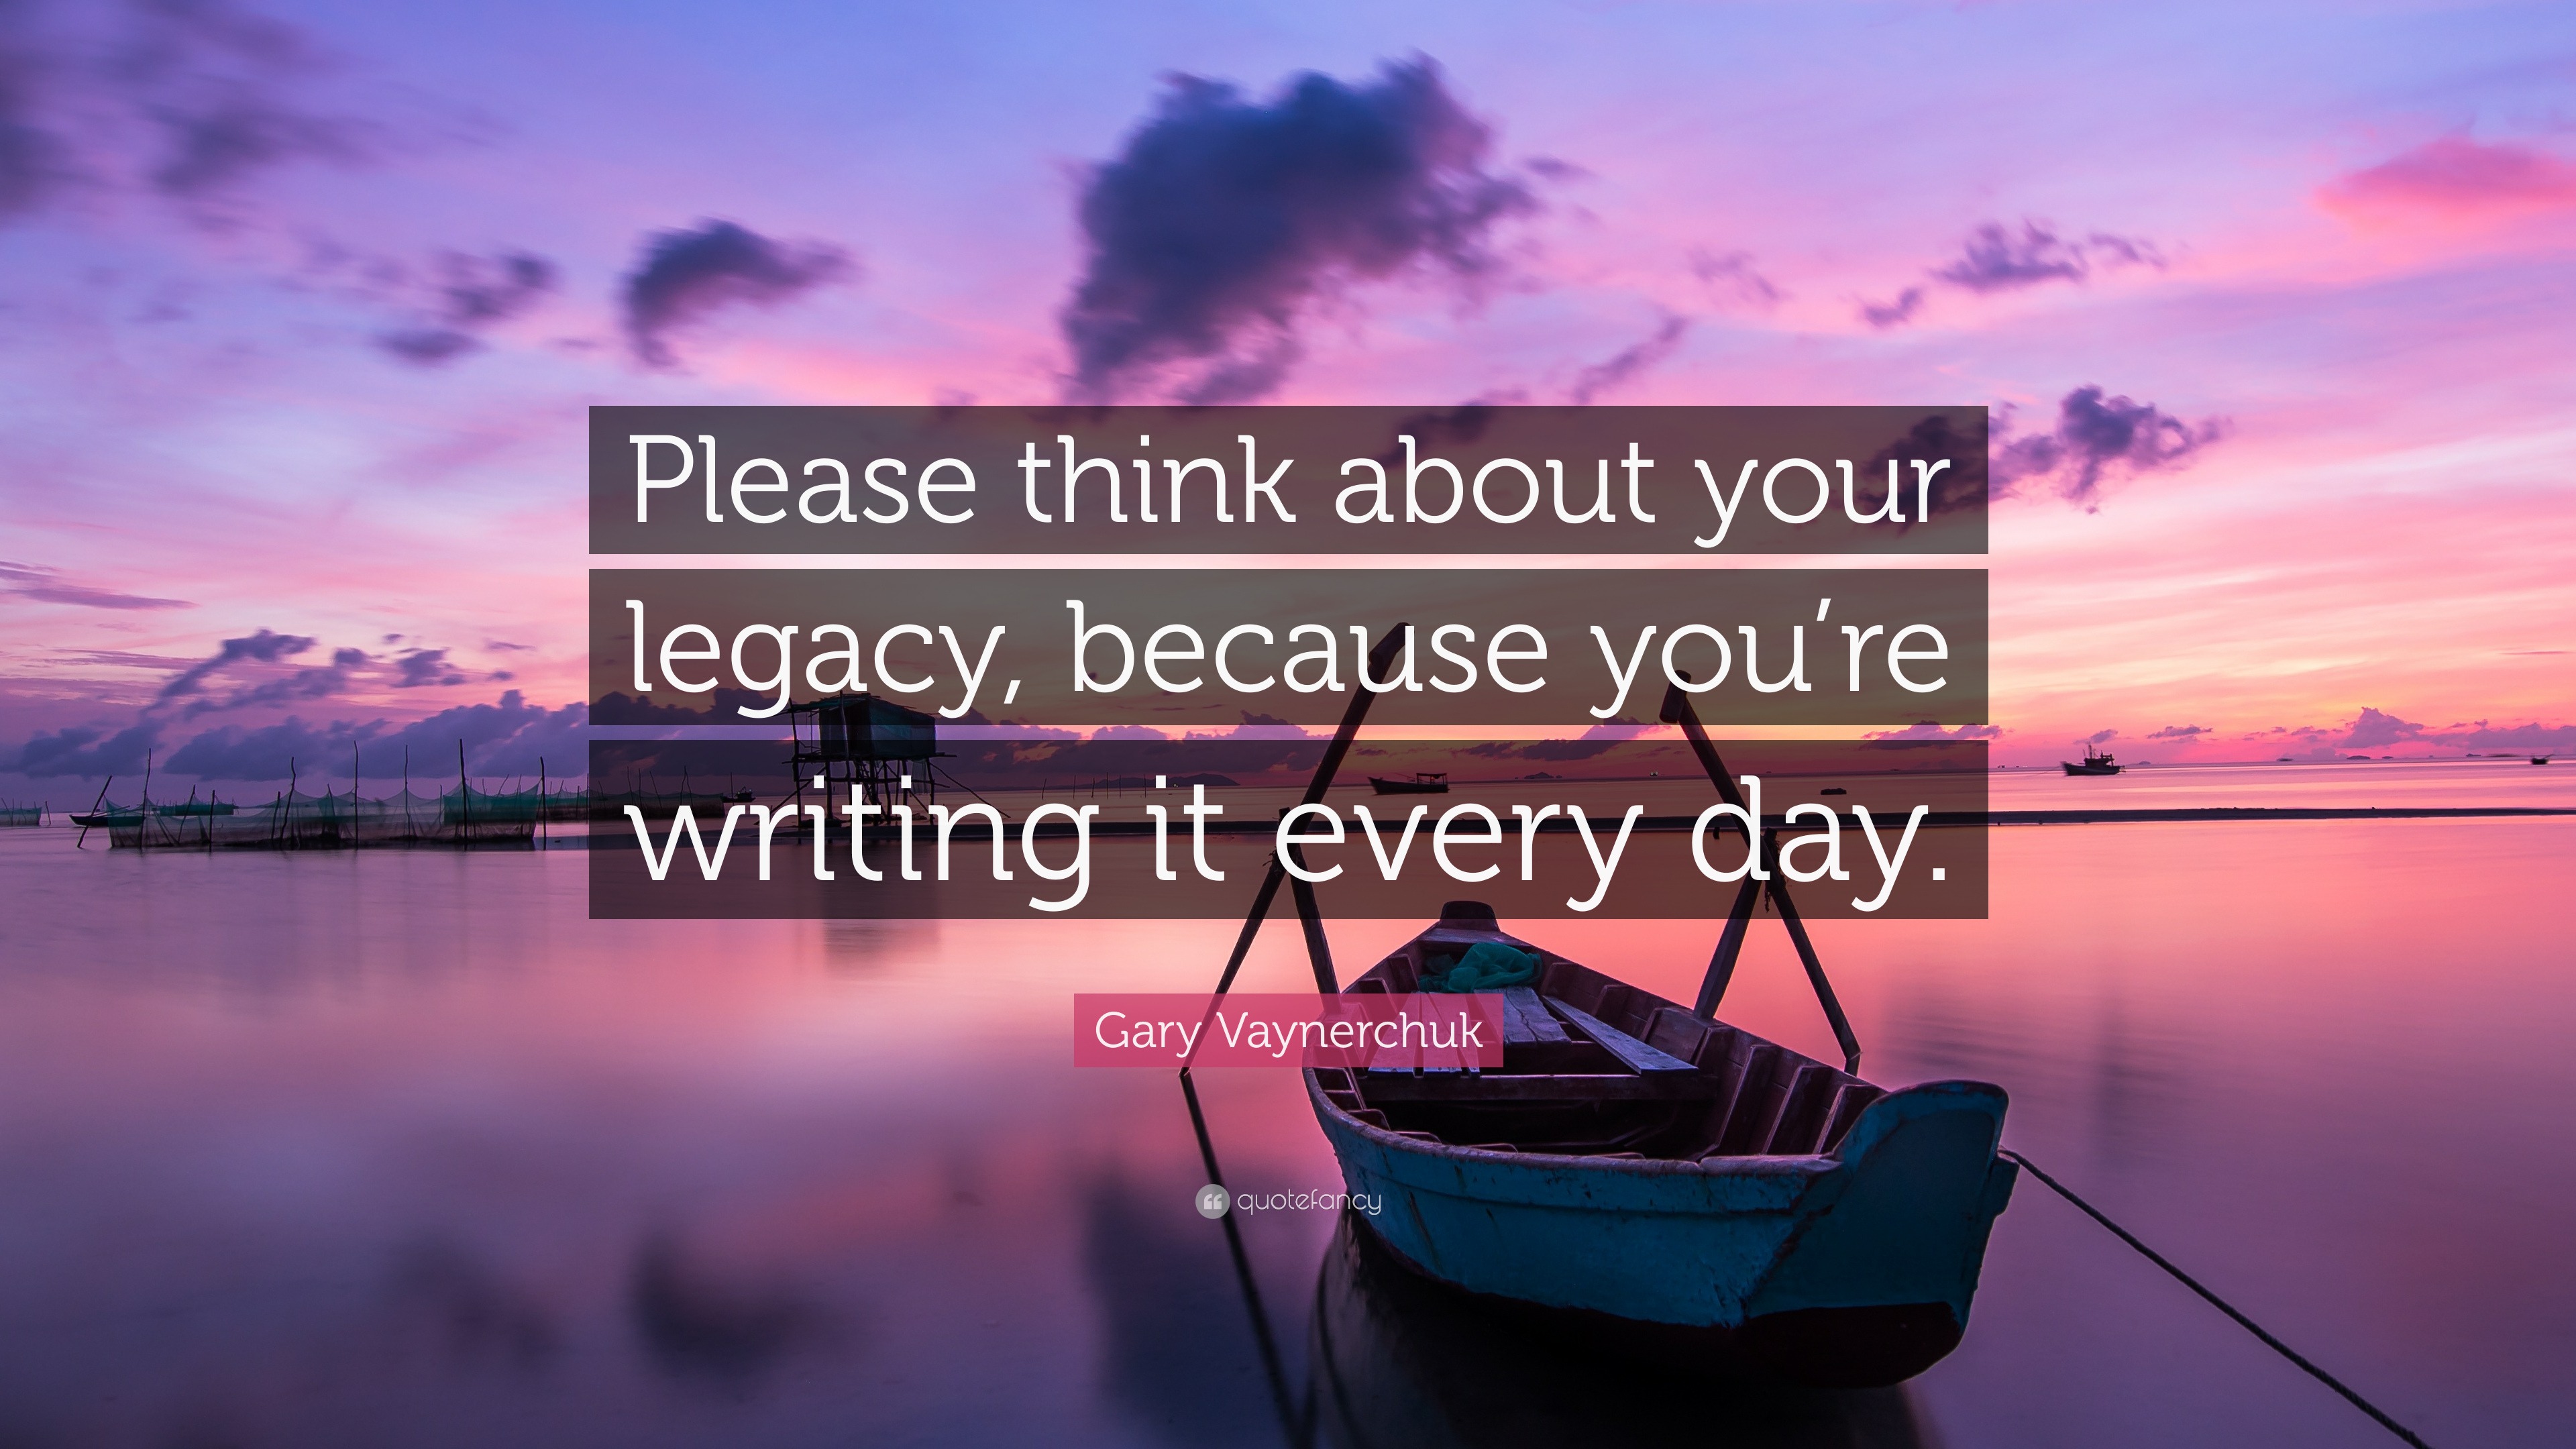 Gary Vaynerchuk Quote: “Please think about your legacy, because you’re